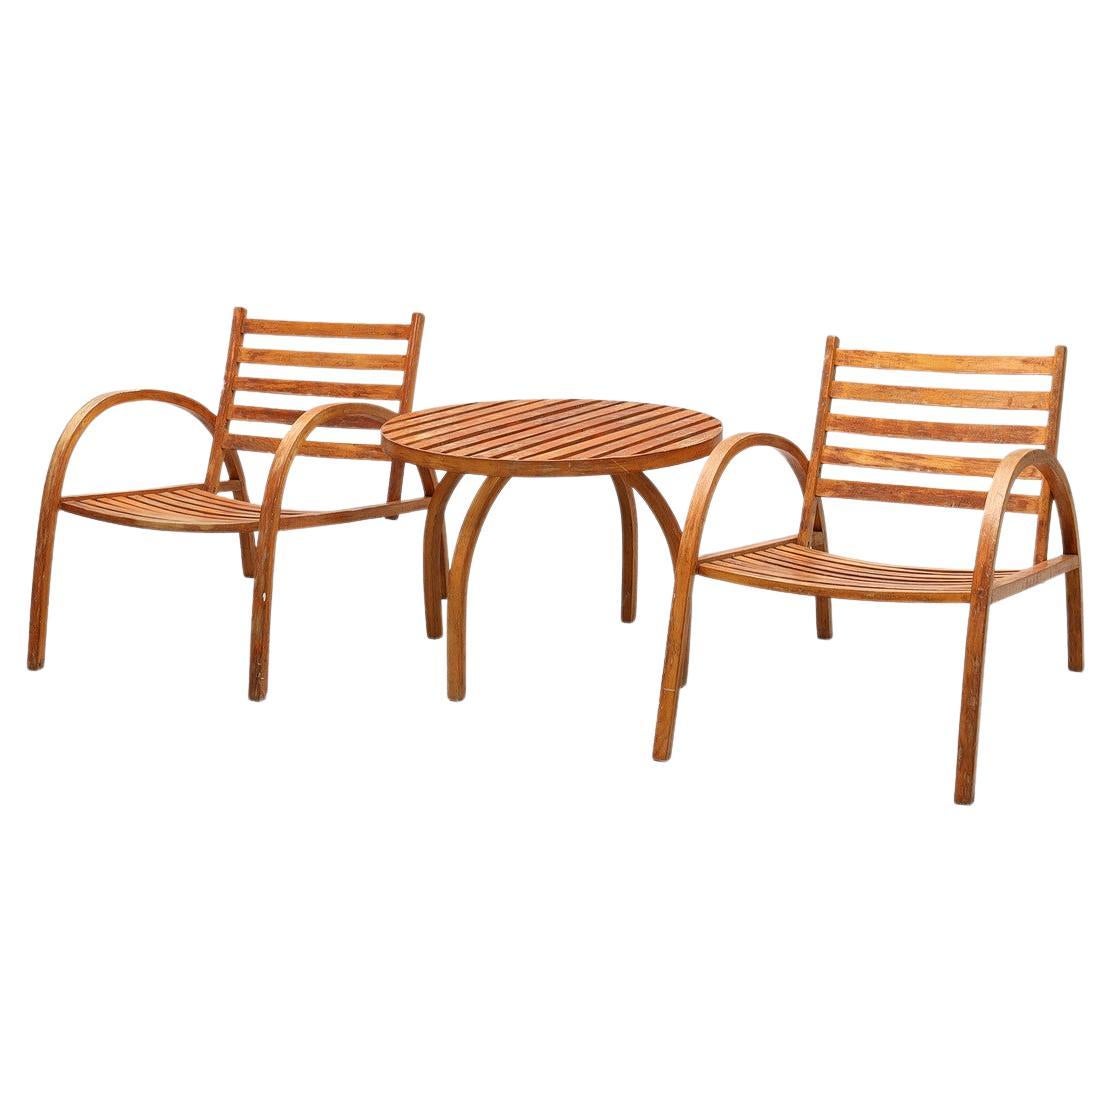 Modernist wooden garden set of furniture pair of chairs and table 1930's For Sale